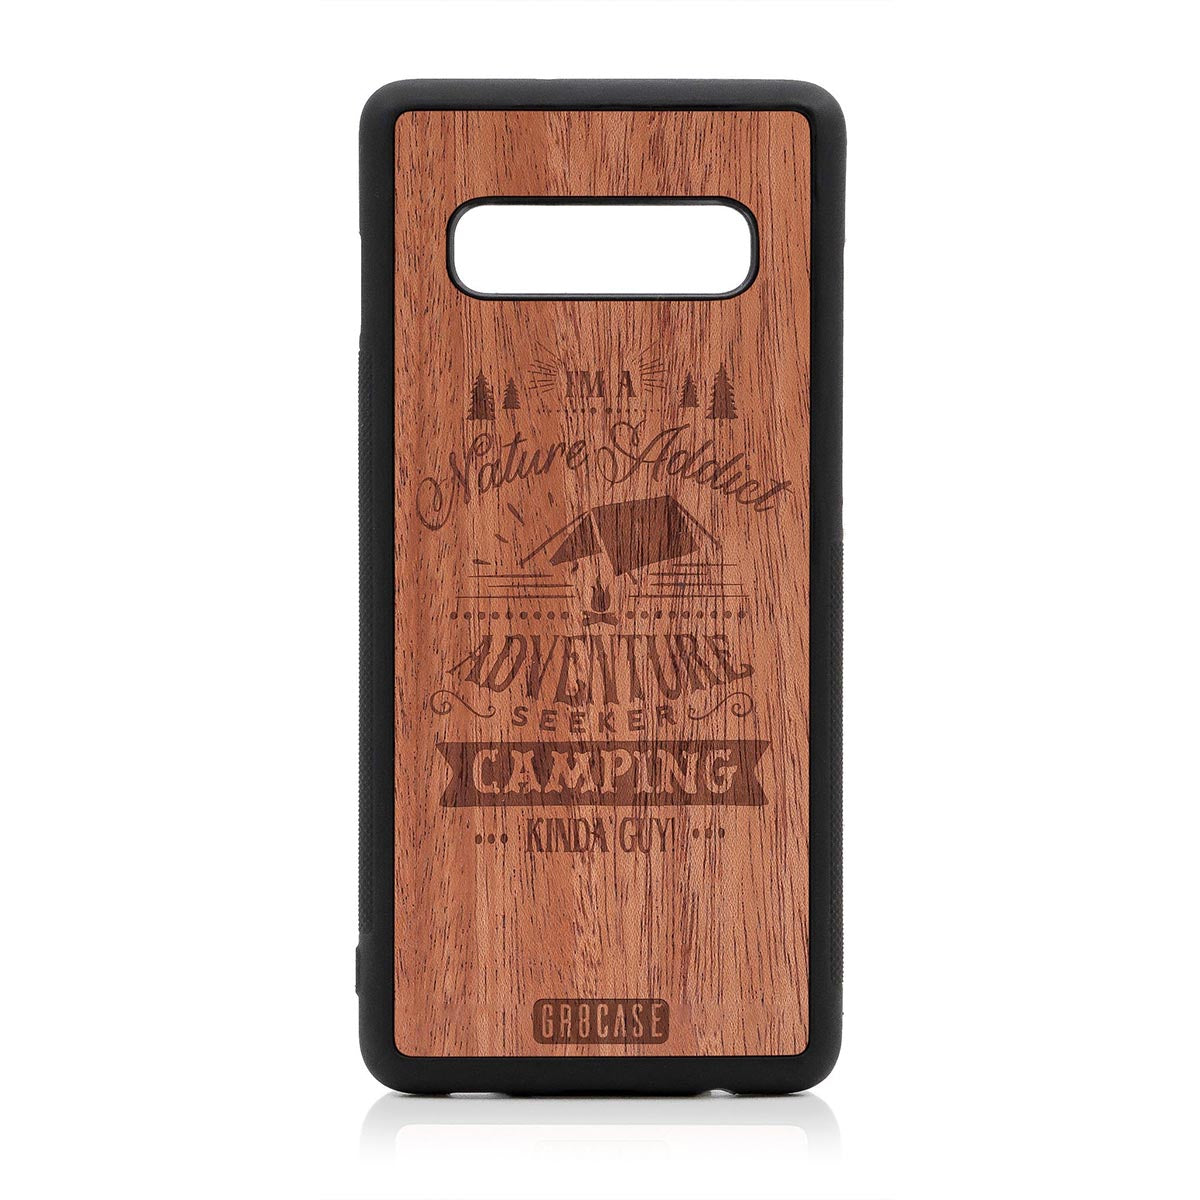 I'm A Nature Addict Adventure Seeker Camping Kinda Guy Design Wood Case Samsung Galaxy S10 Plus by GR8CASE